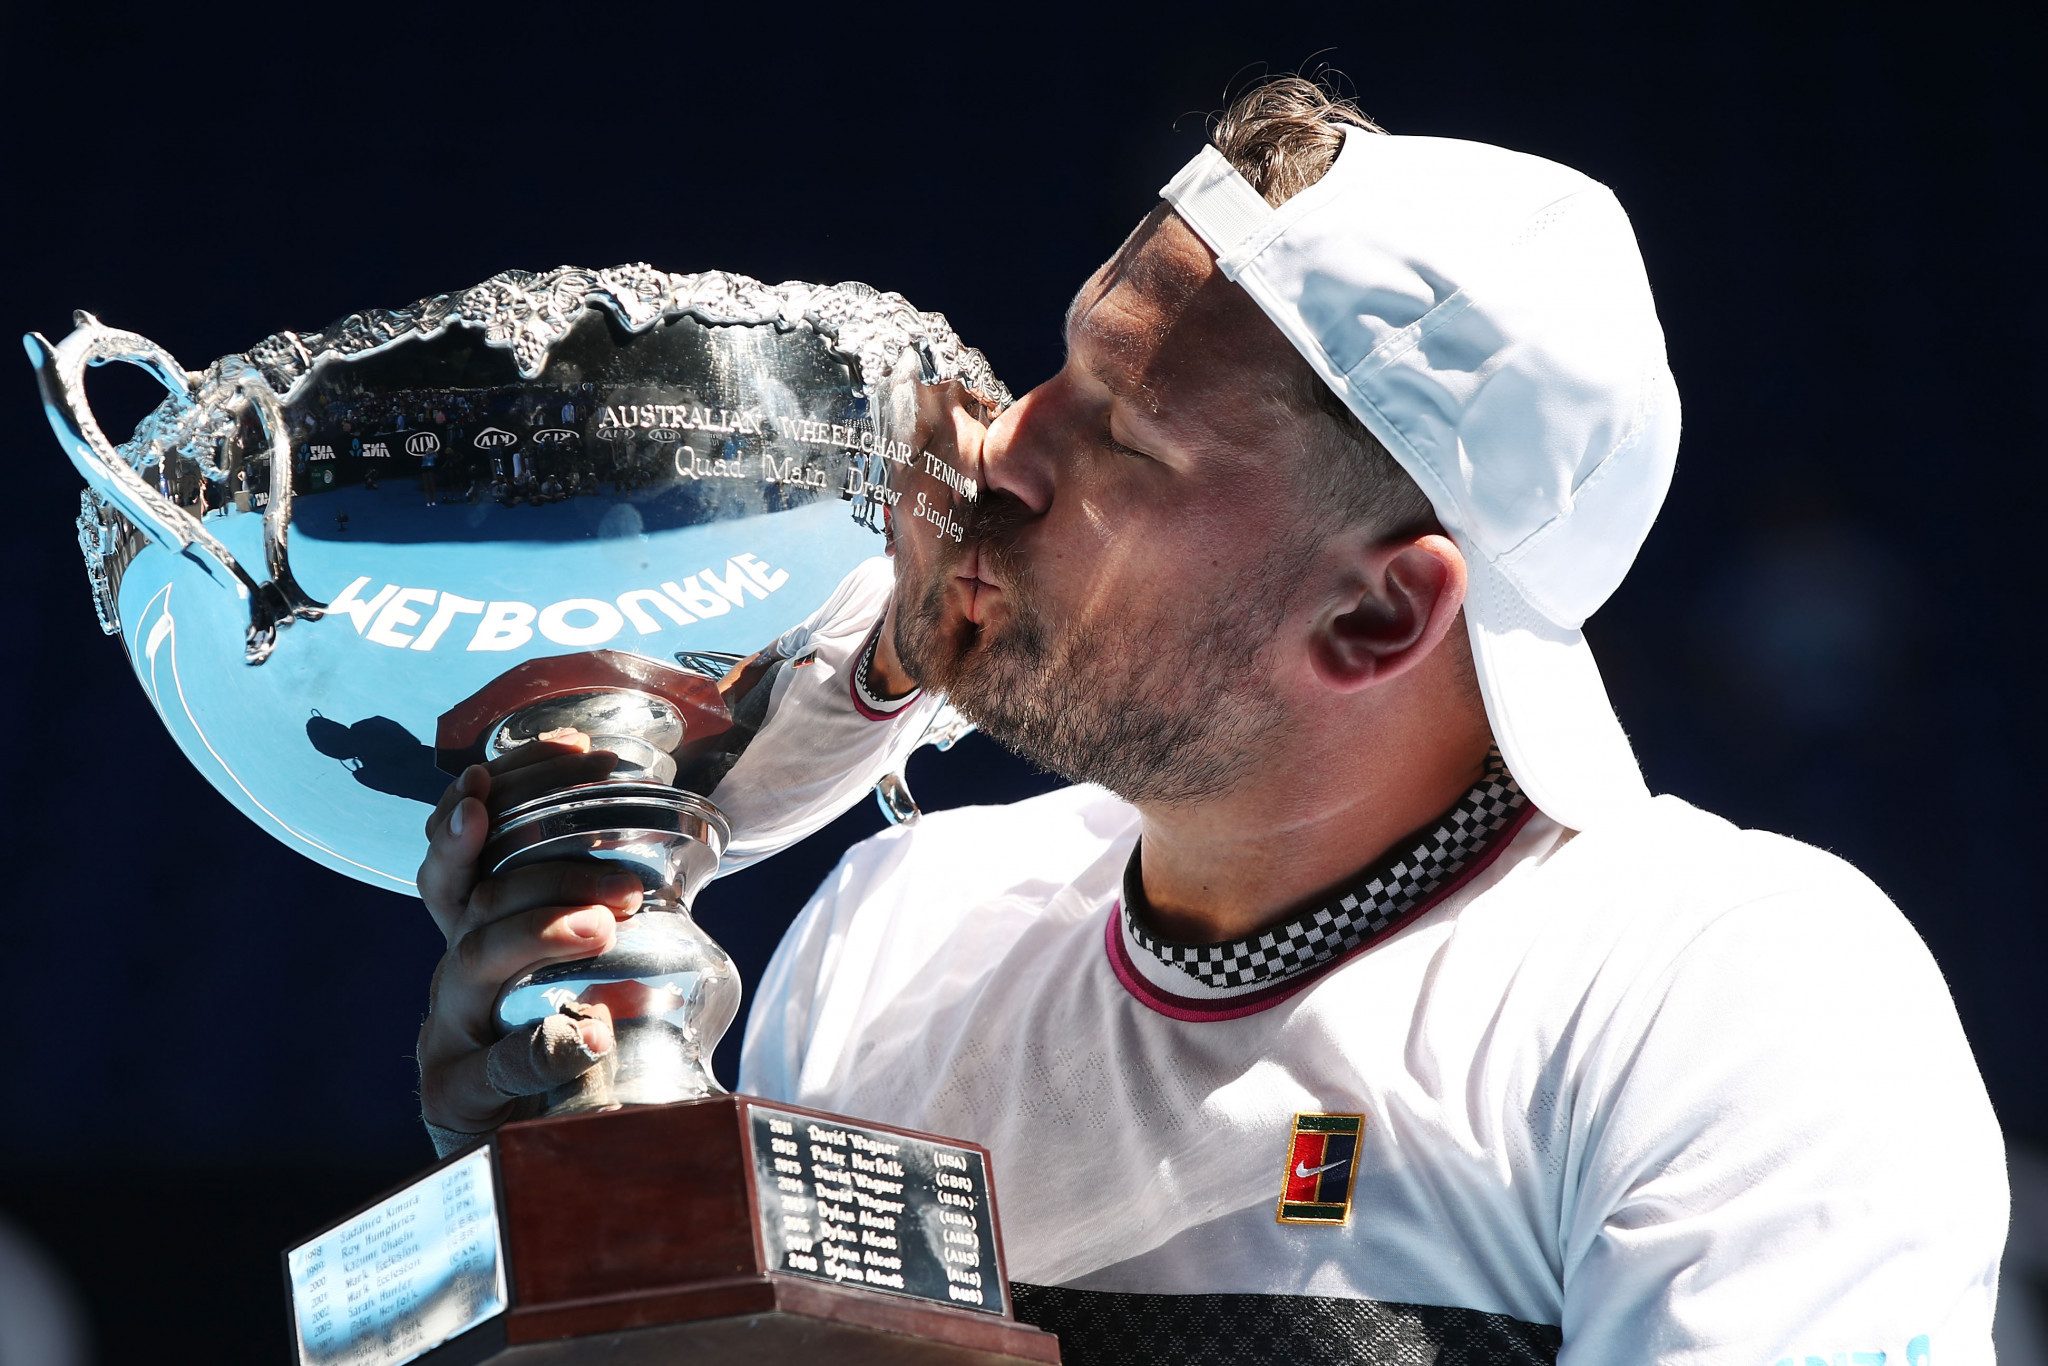 Australia's Dylan Alcott claimed his fifth consecutive quad singles title with victory over America's David Wagner in a match broadcast live on television on Australian Day ©Getty Images